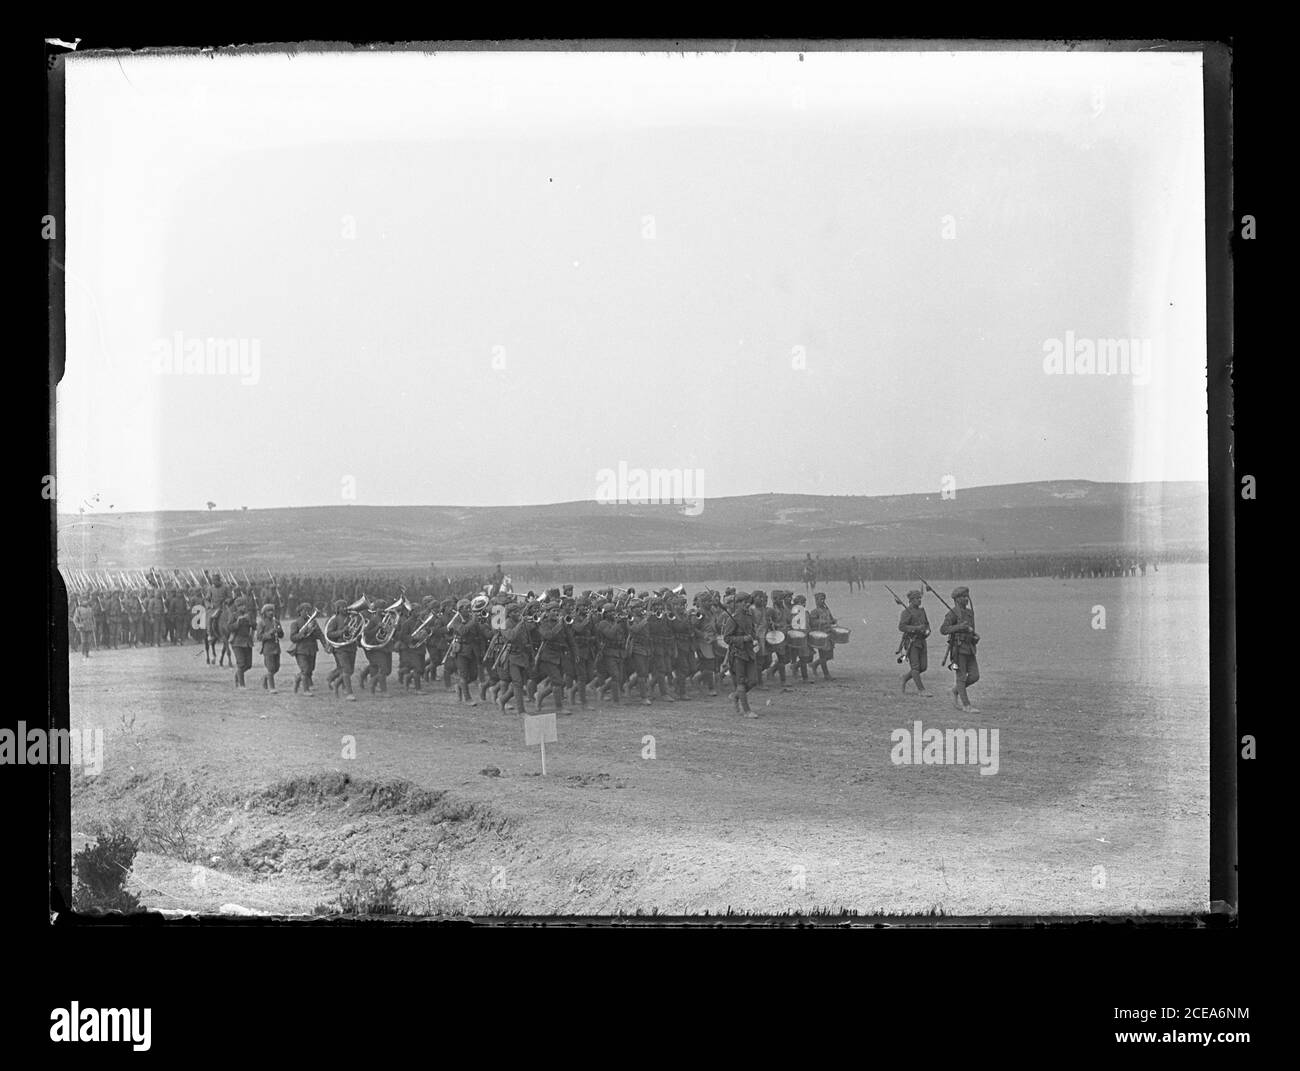 Ottoman Turkish pre-WW I infantry music formation parading on a field.  The soldiers wear headwraps and puttees. Photograph on dry glass plate from the Herry W. Schaefer collection, around 1913. Stock Photo